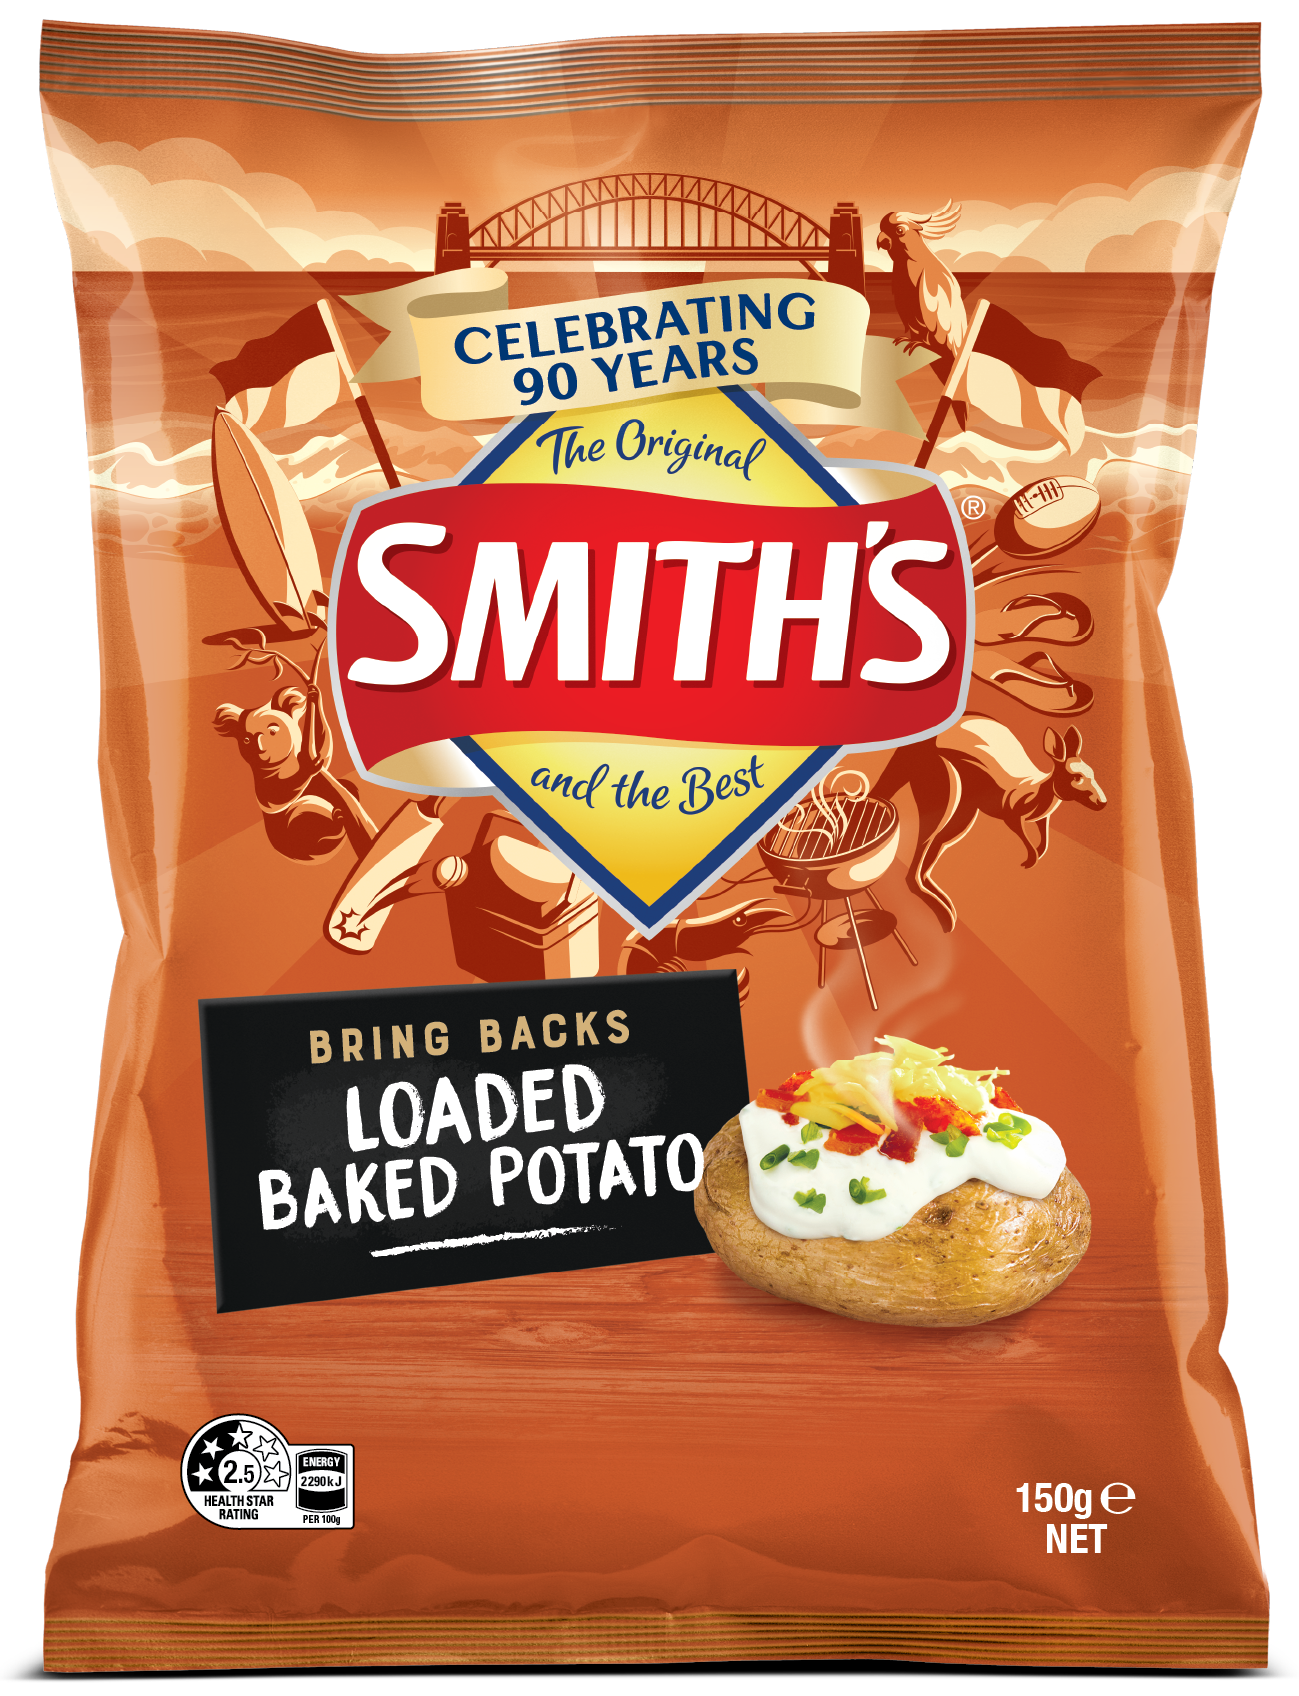 Product shot of a packed of &quot;Loaded Baked Potato&quot; chips